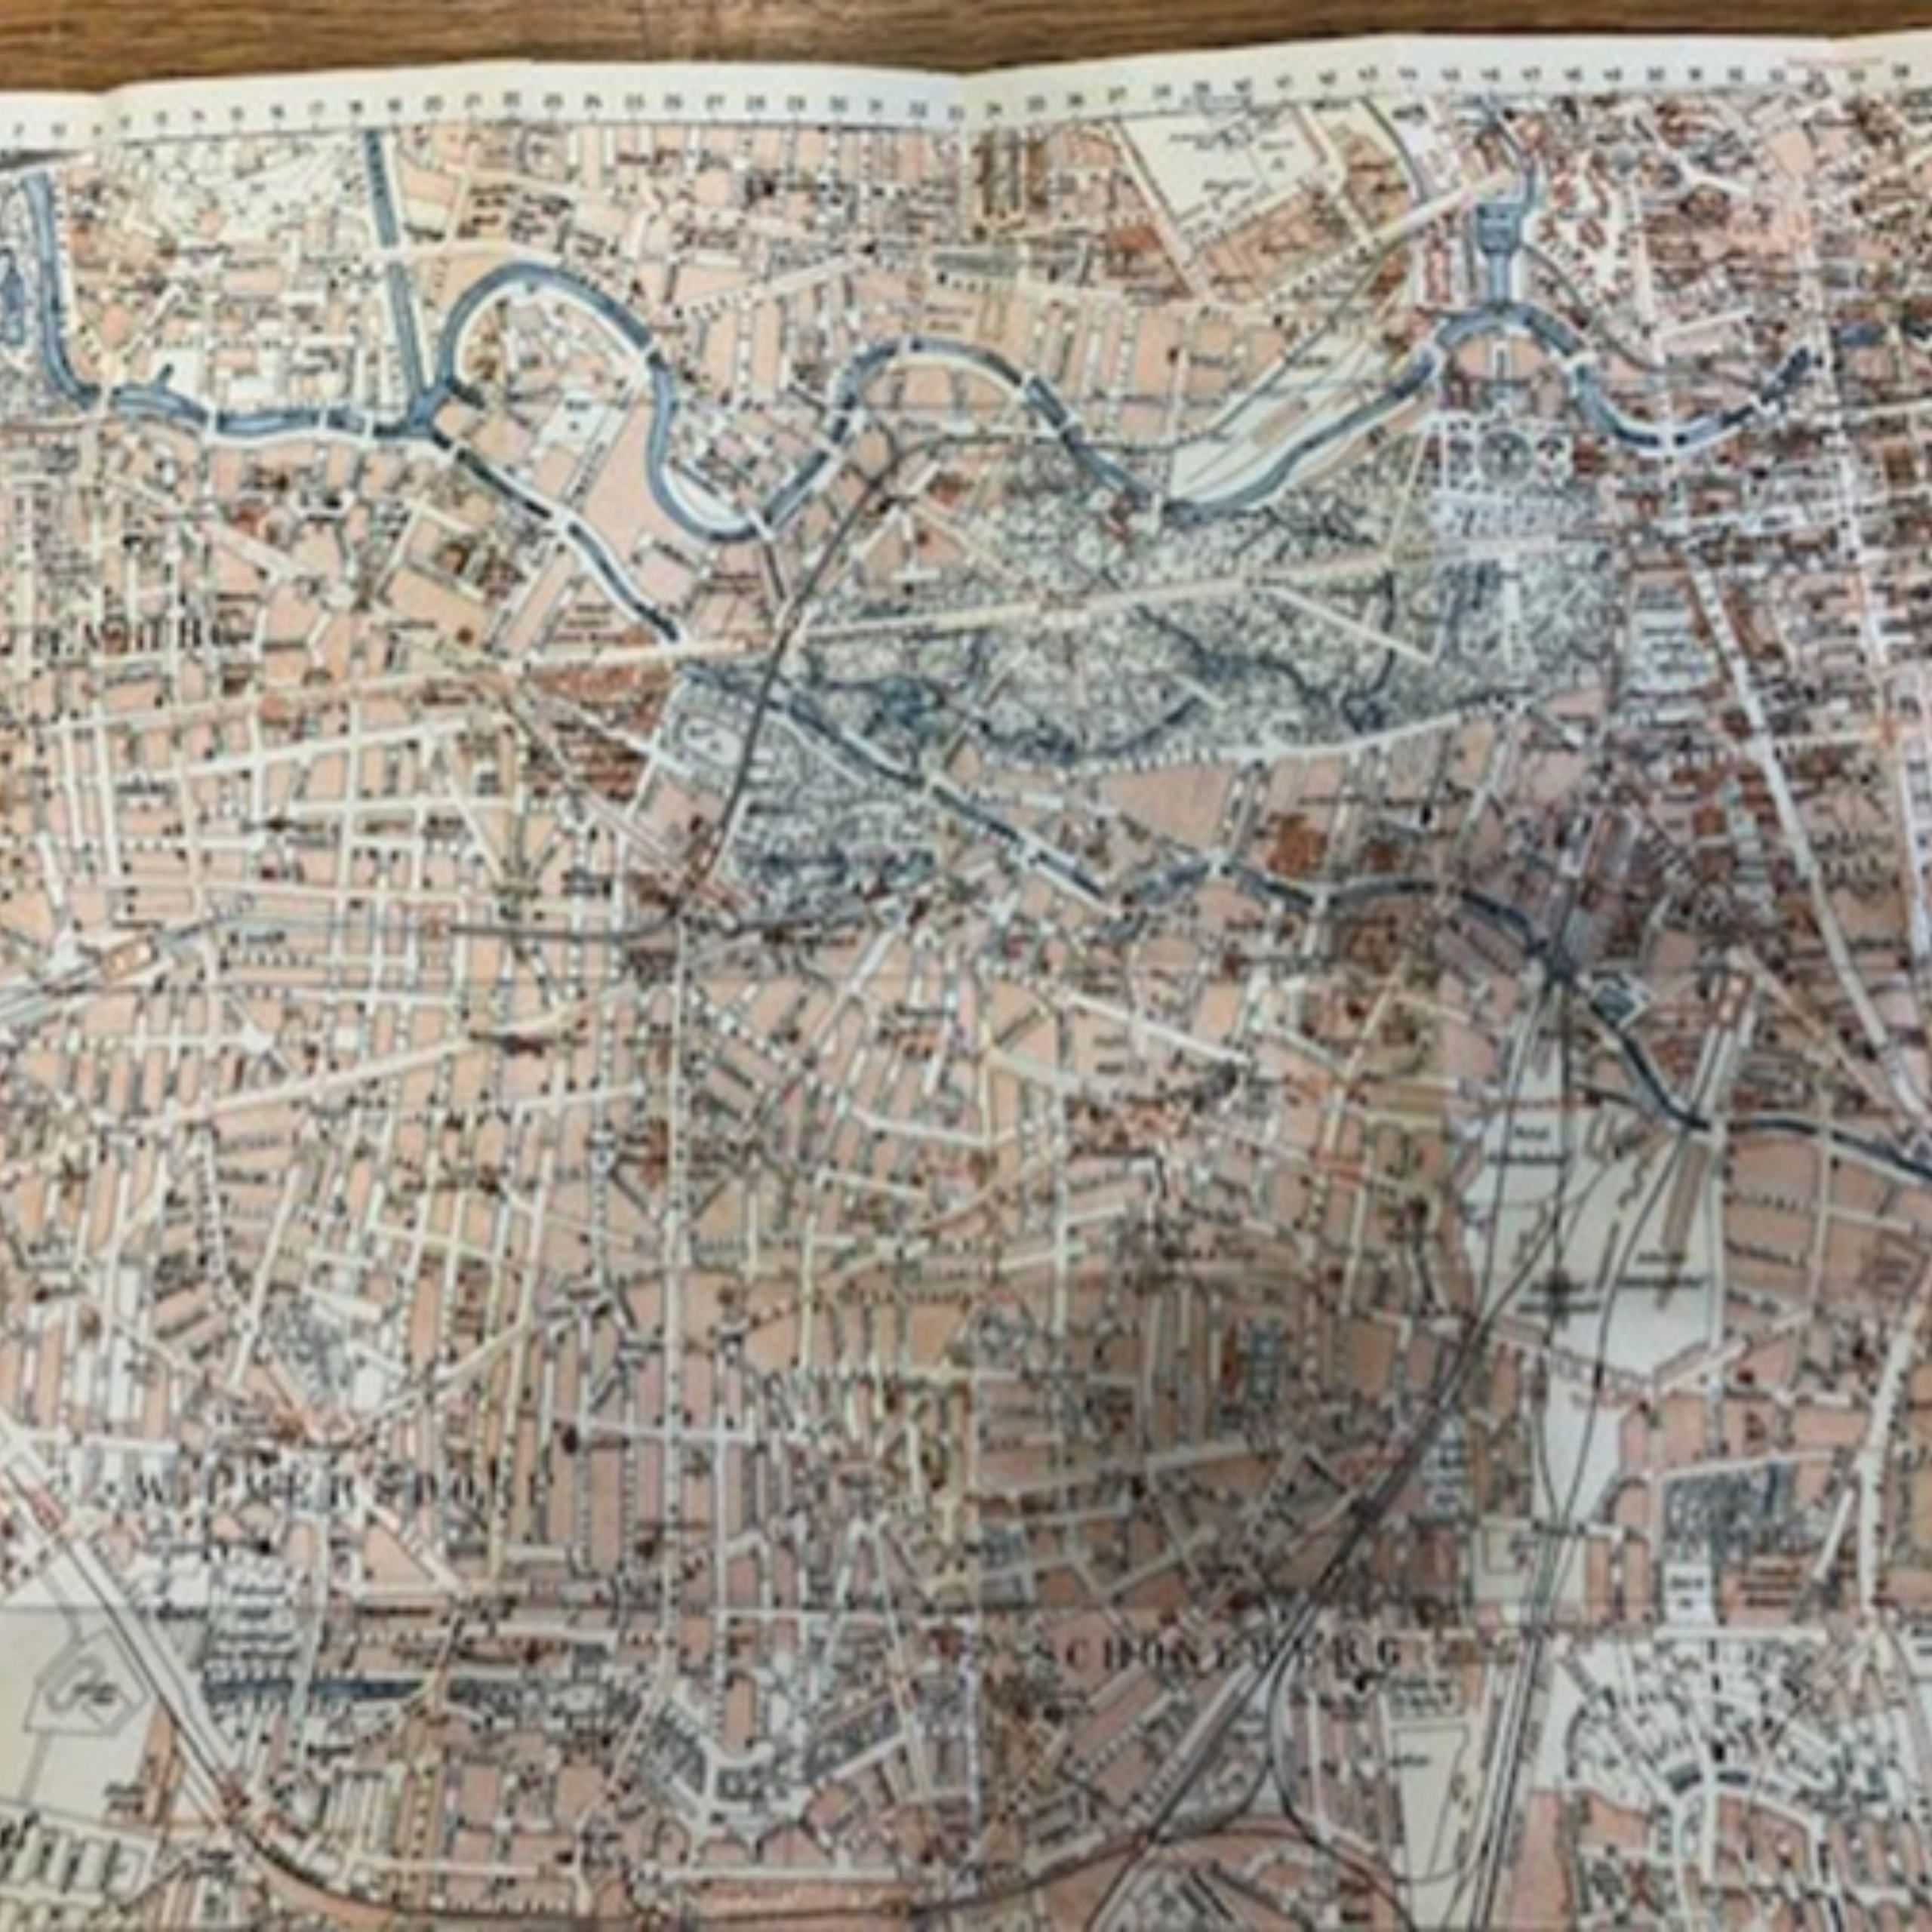 Image of a historic map of Berlin.